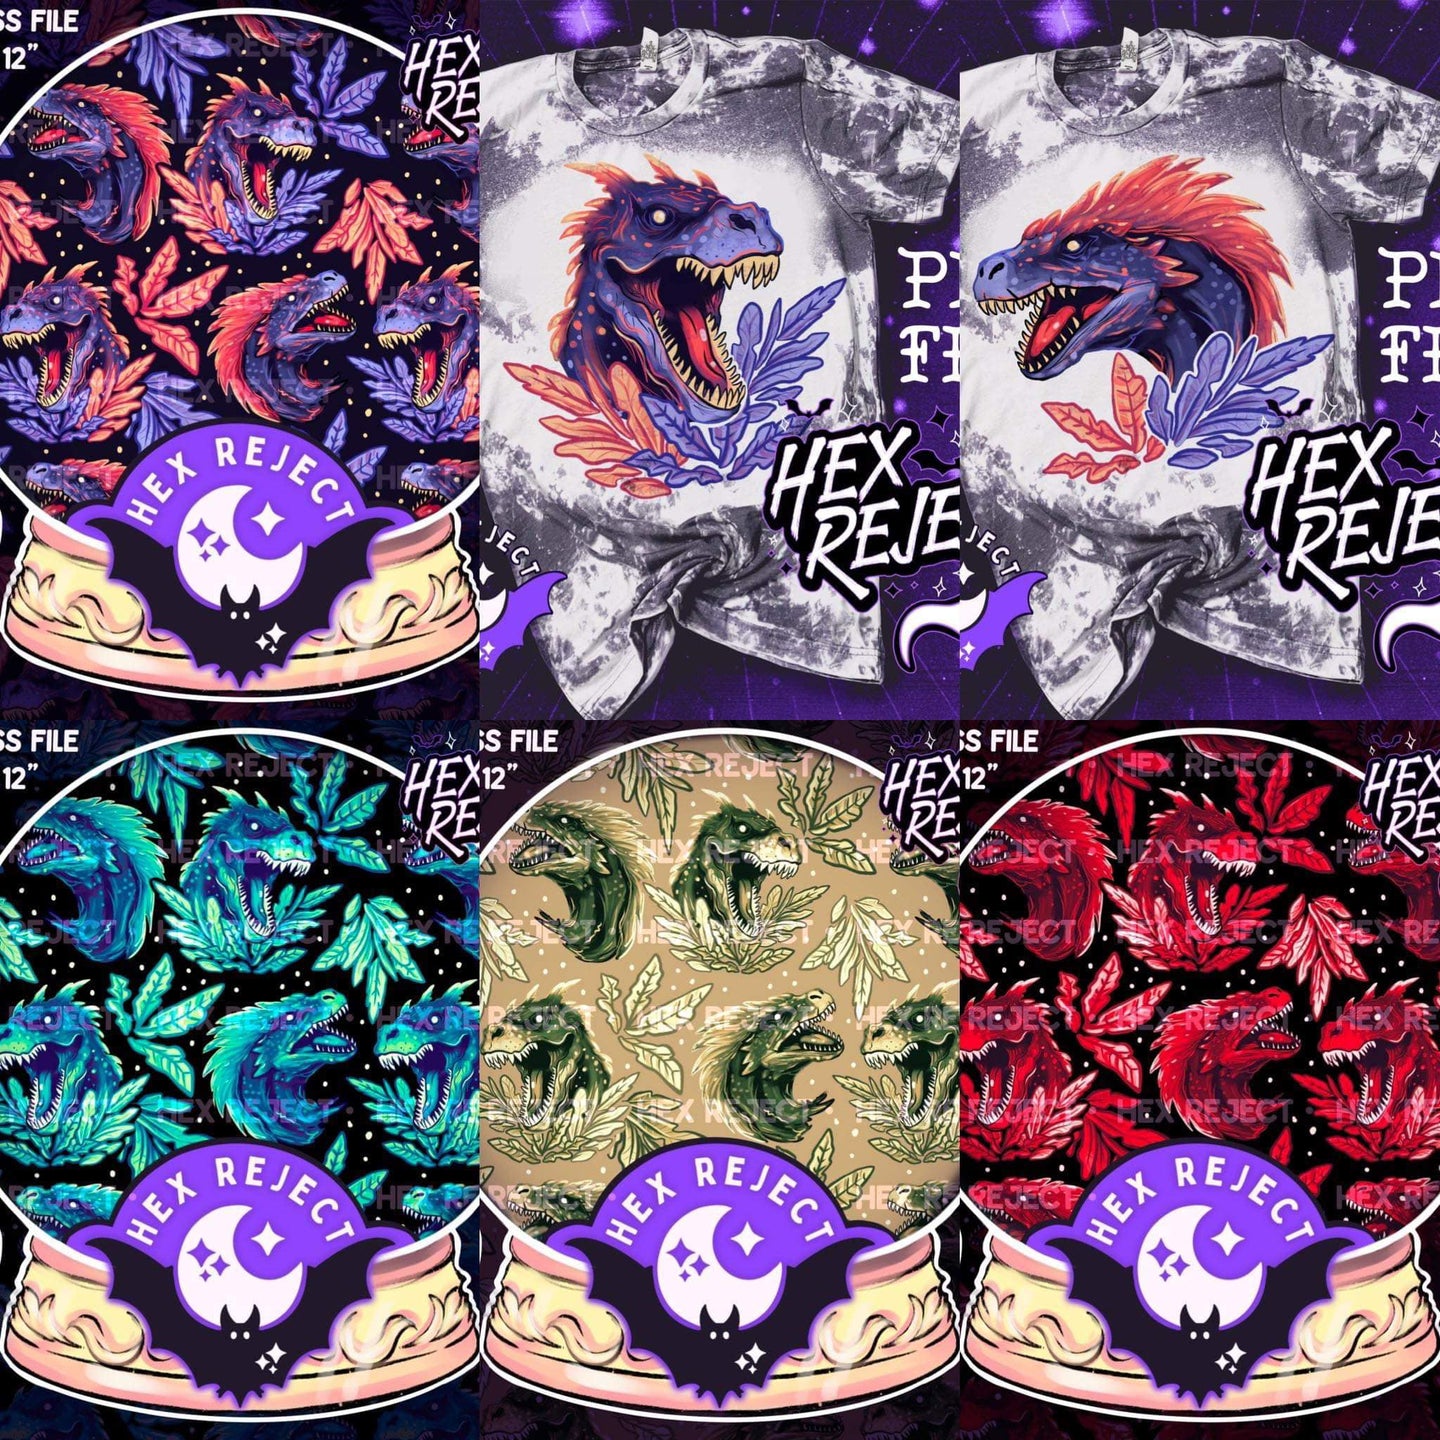 Fierce Dinos for Aldo by Hex Reject - 2-5 business days to ship - Order by 1/2 yard